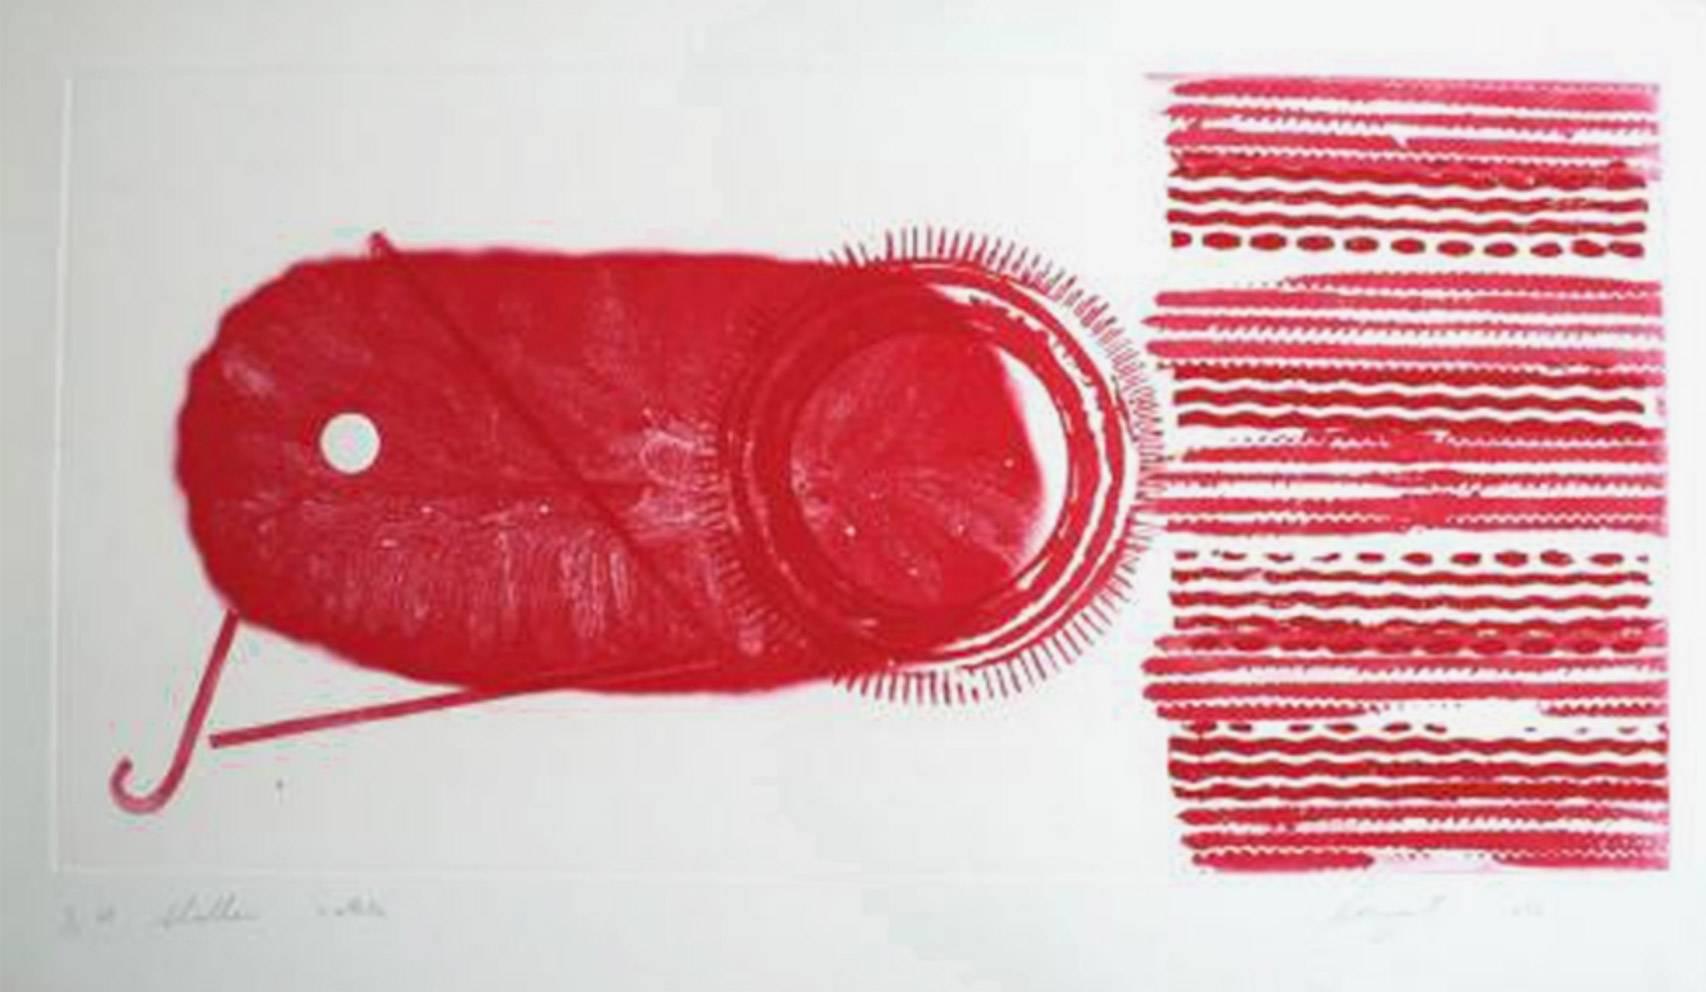 Shallows: 2 State - Print by James Rosenquist